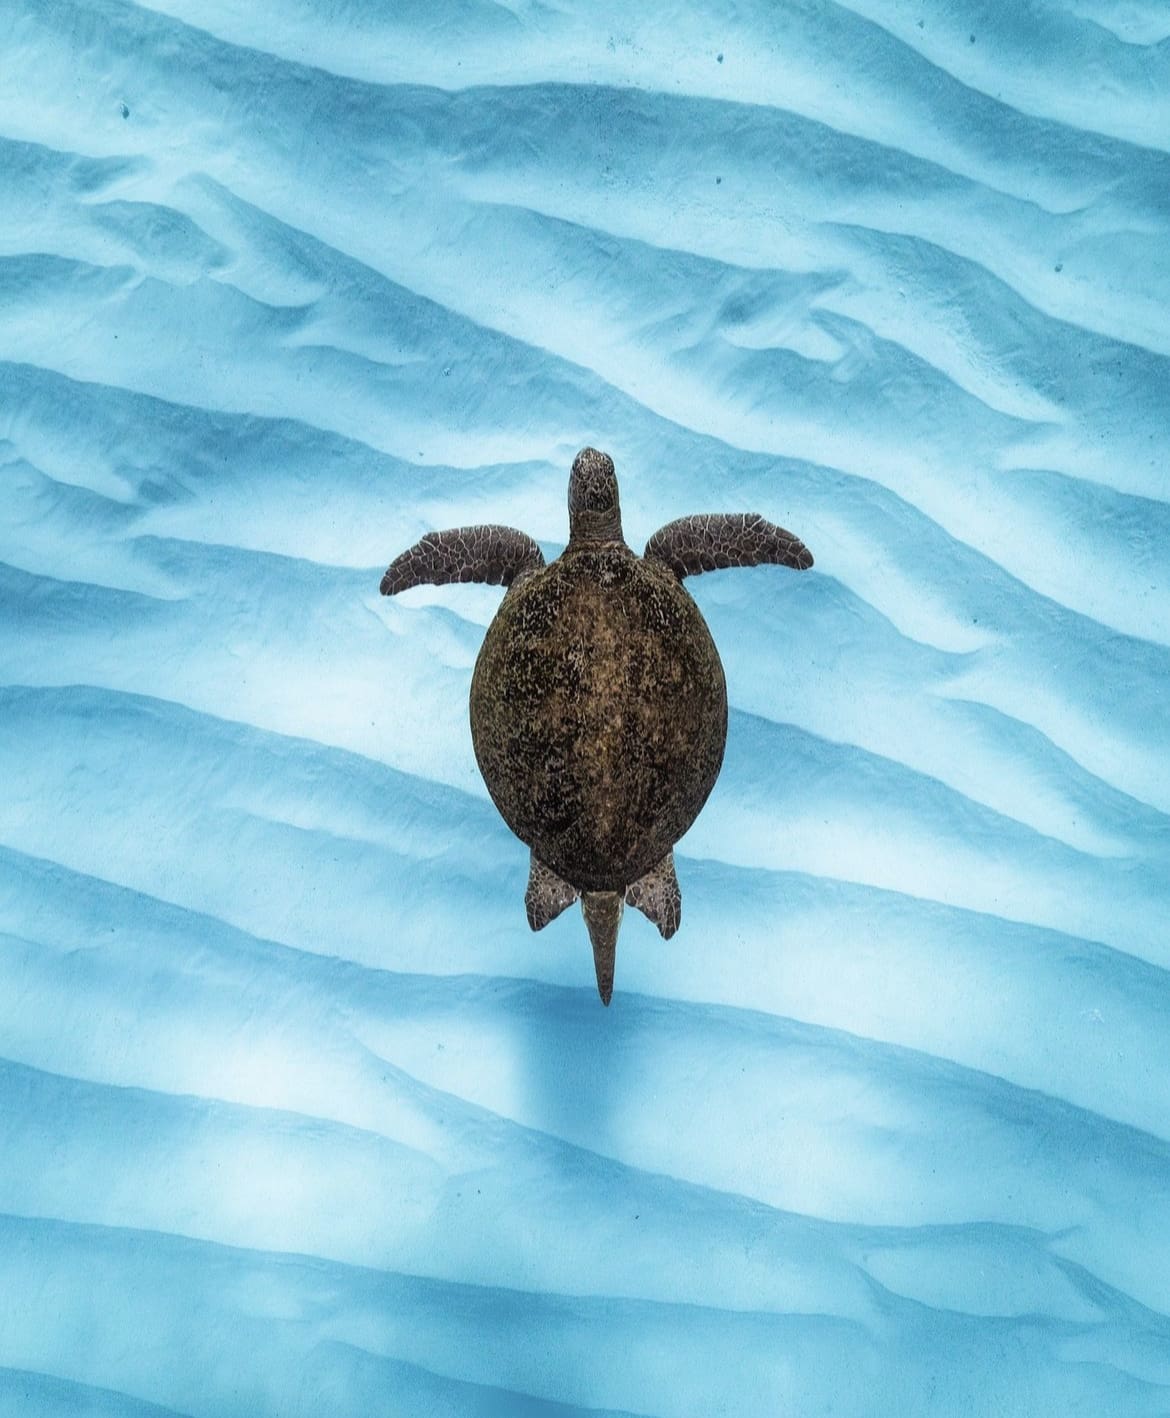 Green Turtle drifting along the seabed - The Seven Types of Sea Turtle